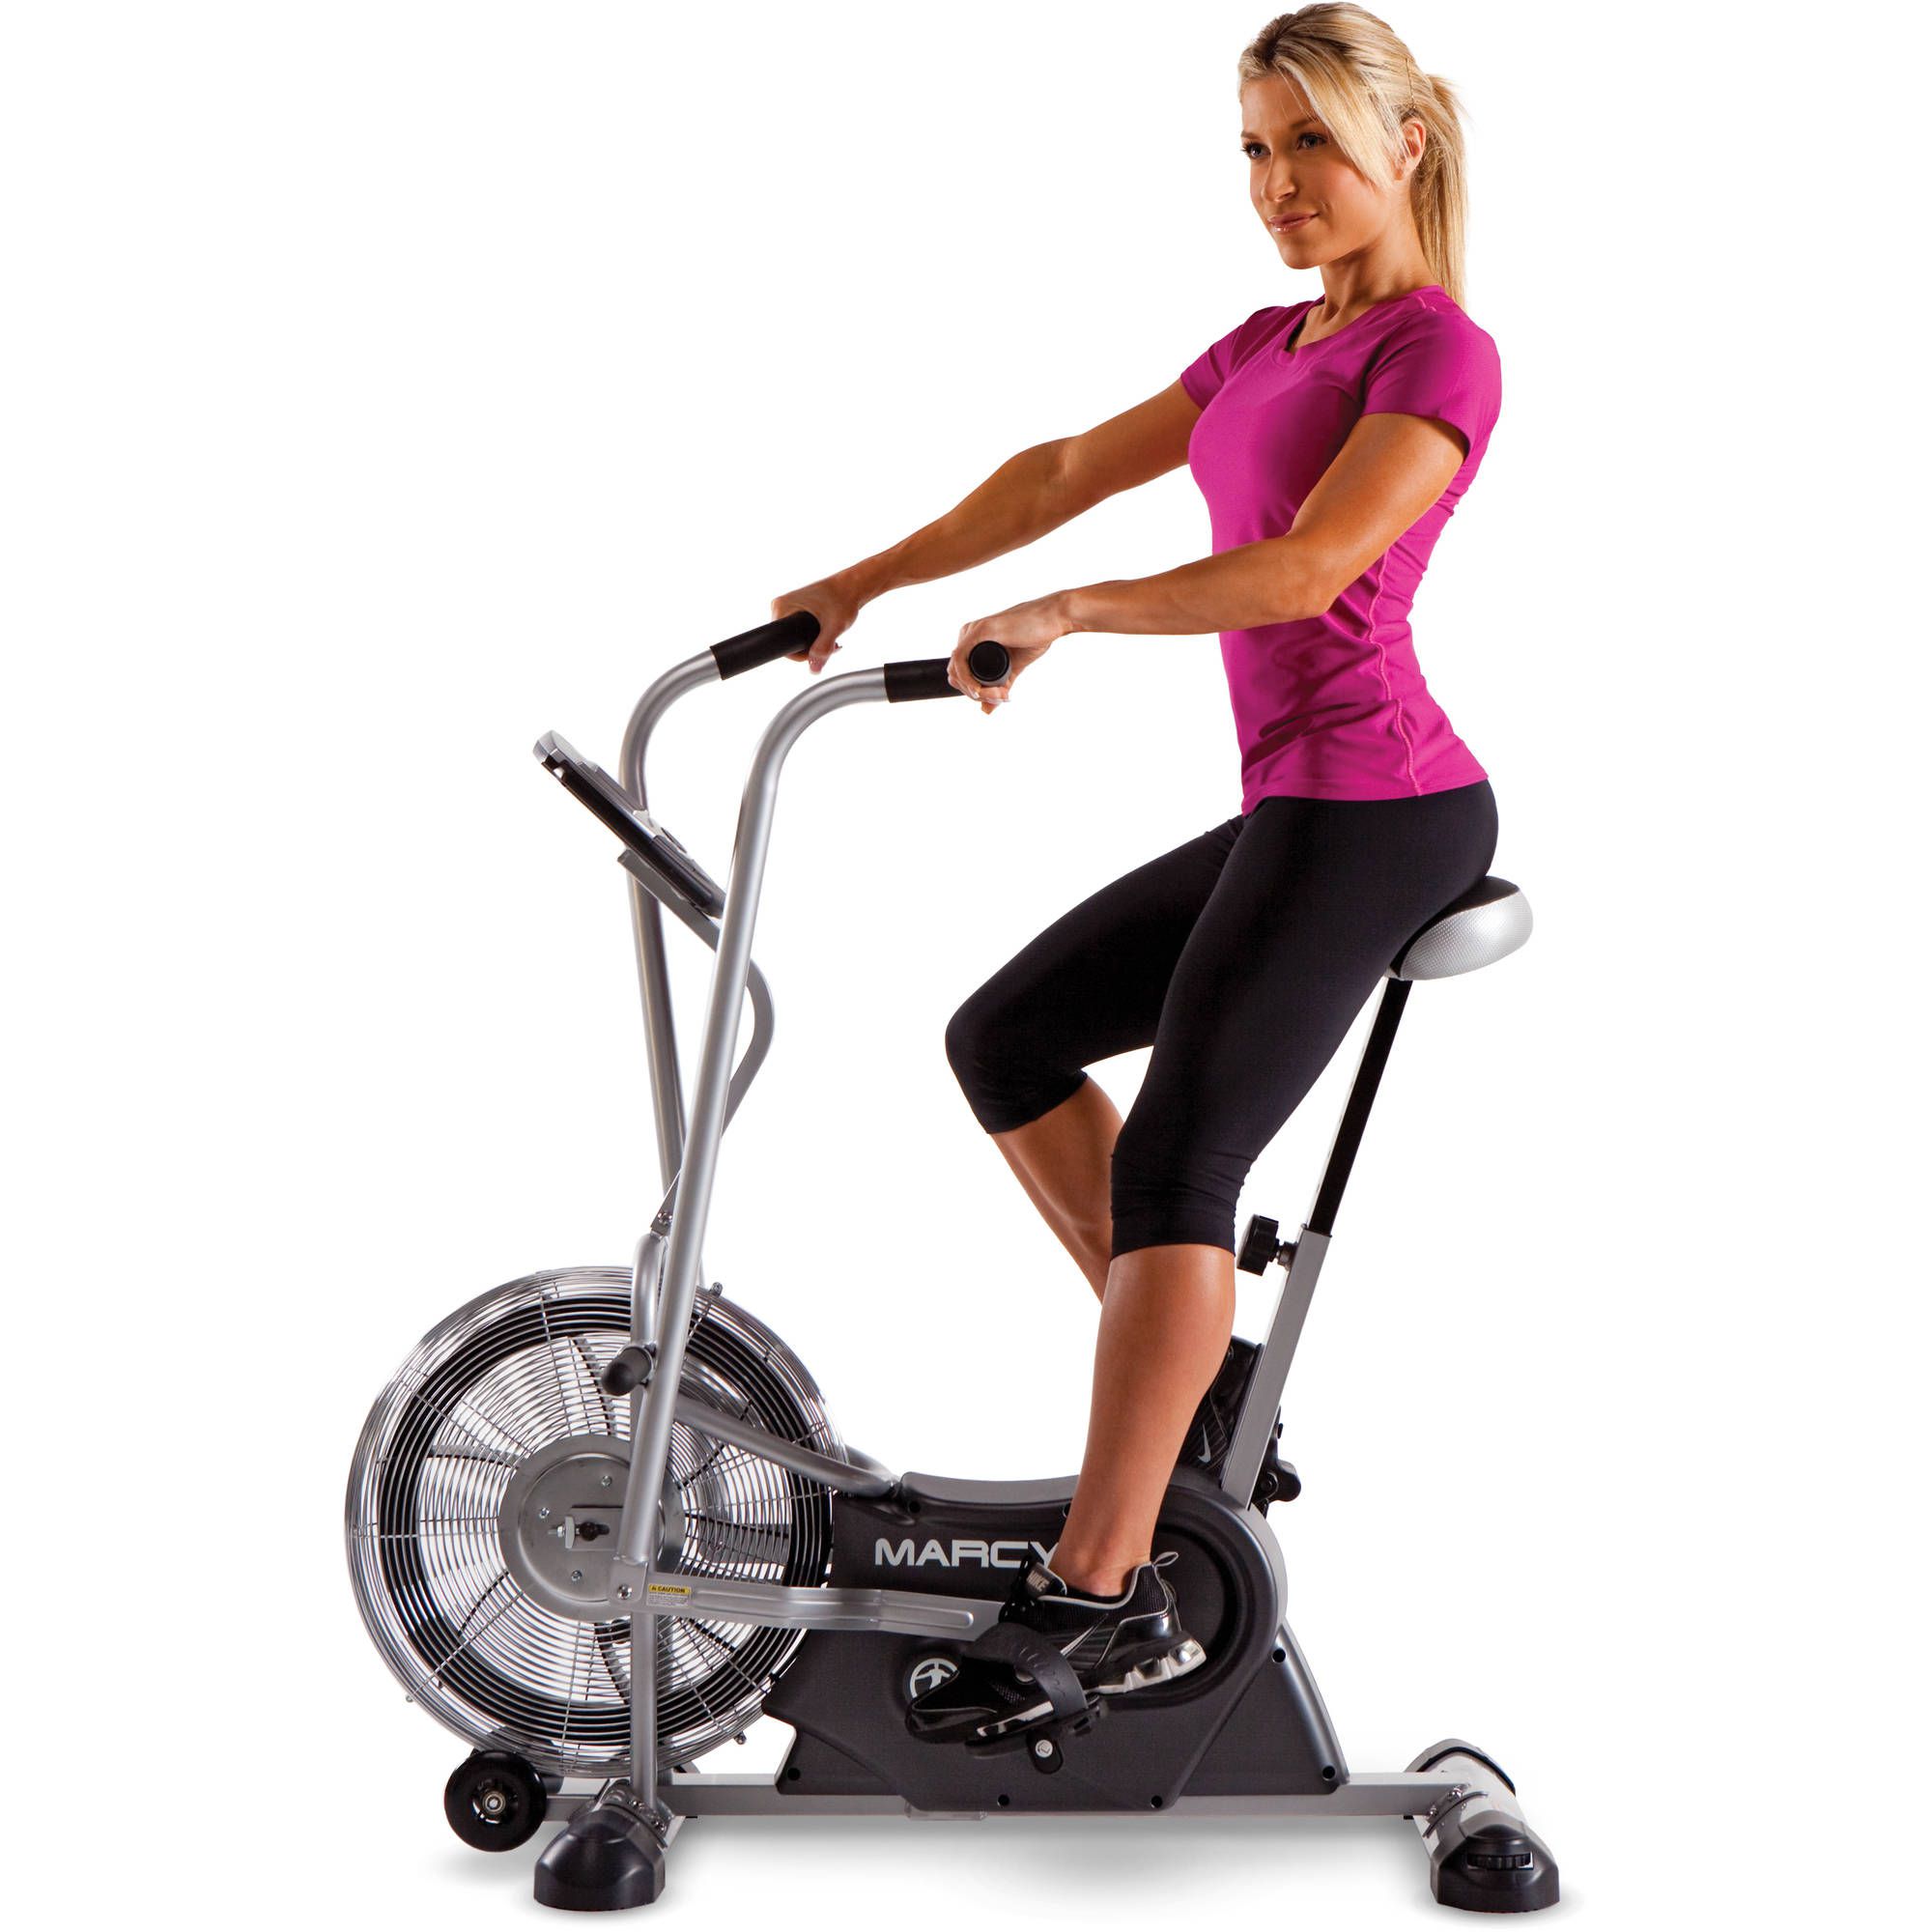 The 7 Best Exercise Bikes to Buy in 2018 - MarcyExerciseFanBike AIR 1 5a67948c43a103001aDD7593